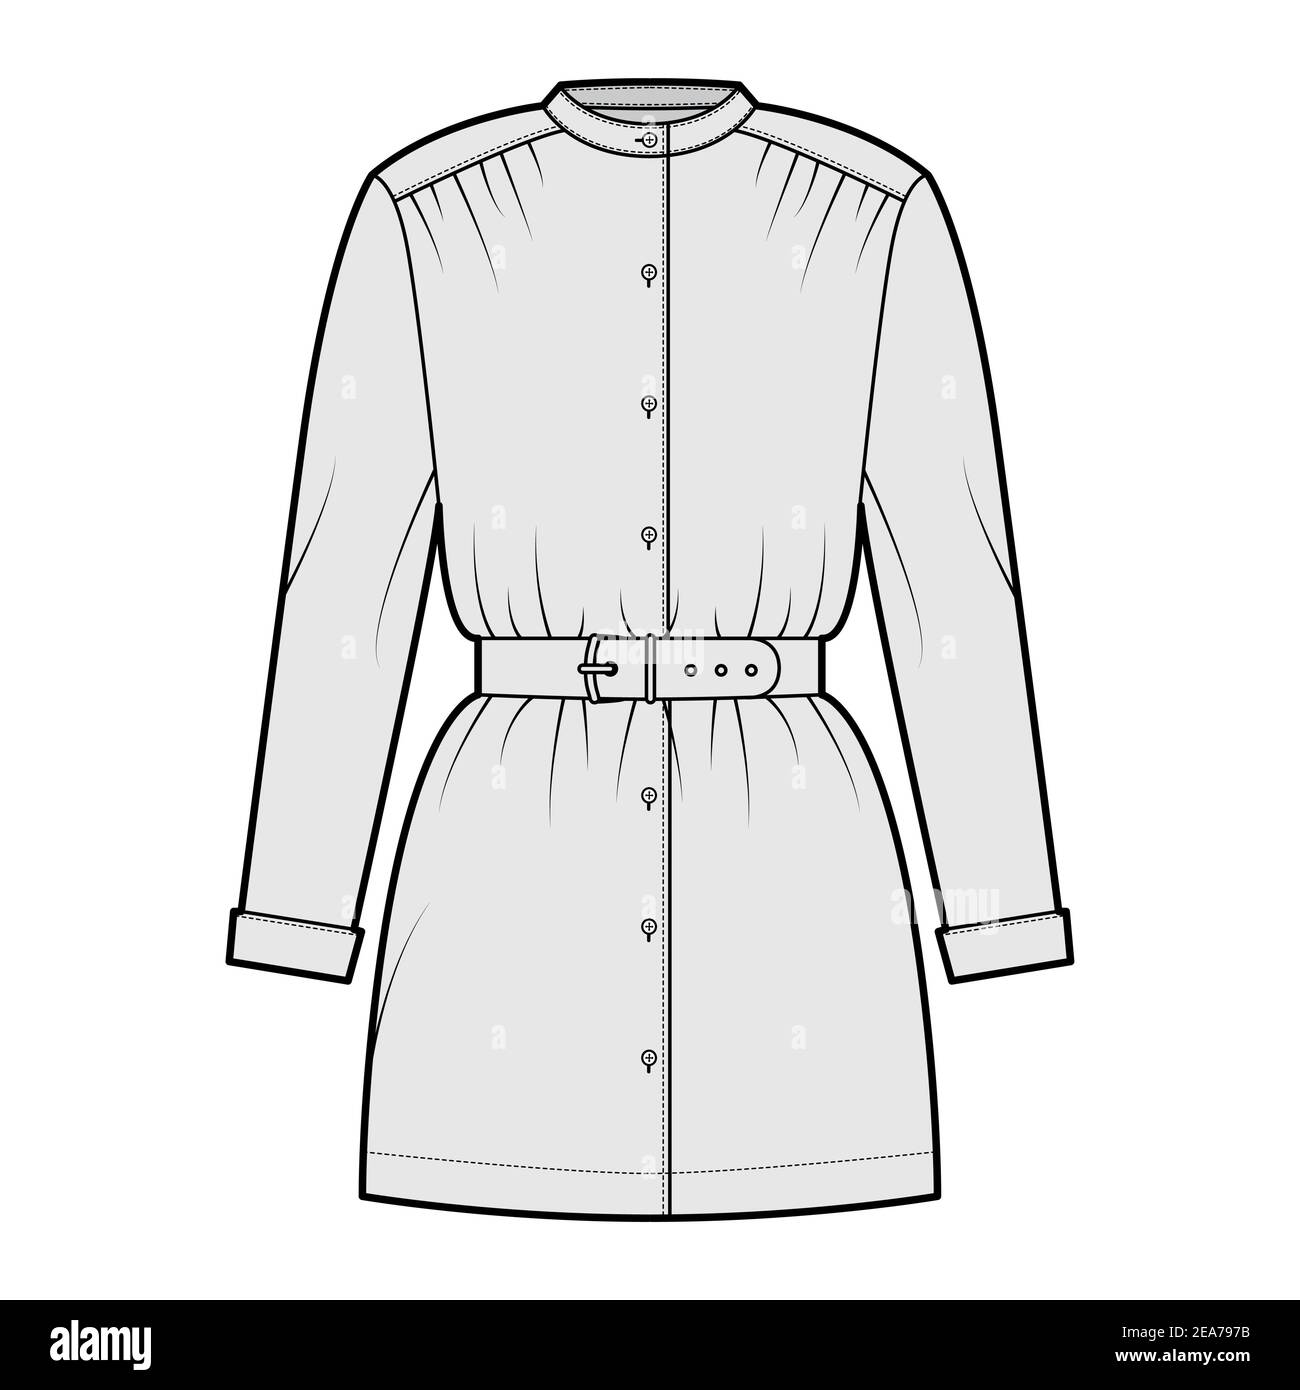 Belted Blouse High Resolution Stock Photography and Images - Alamy